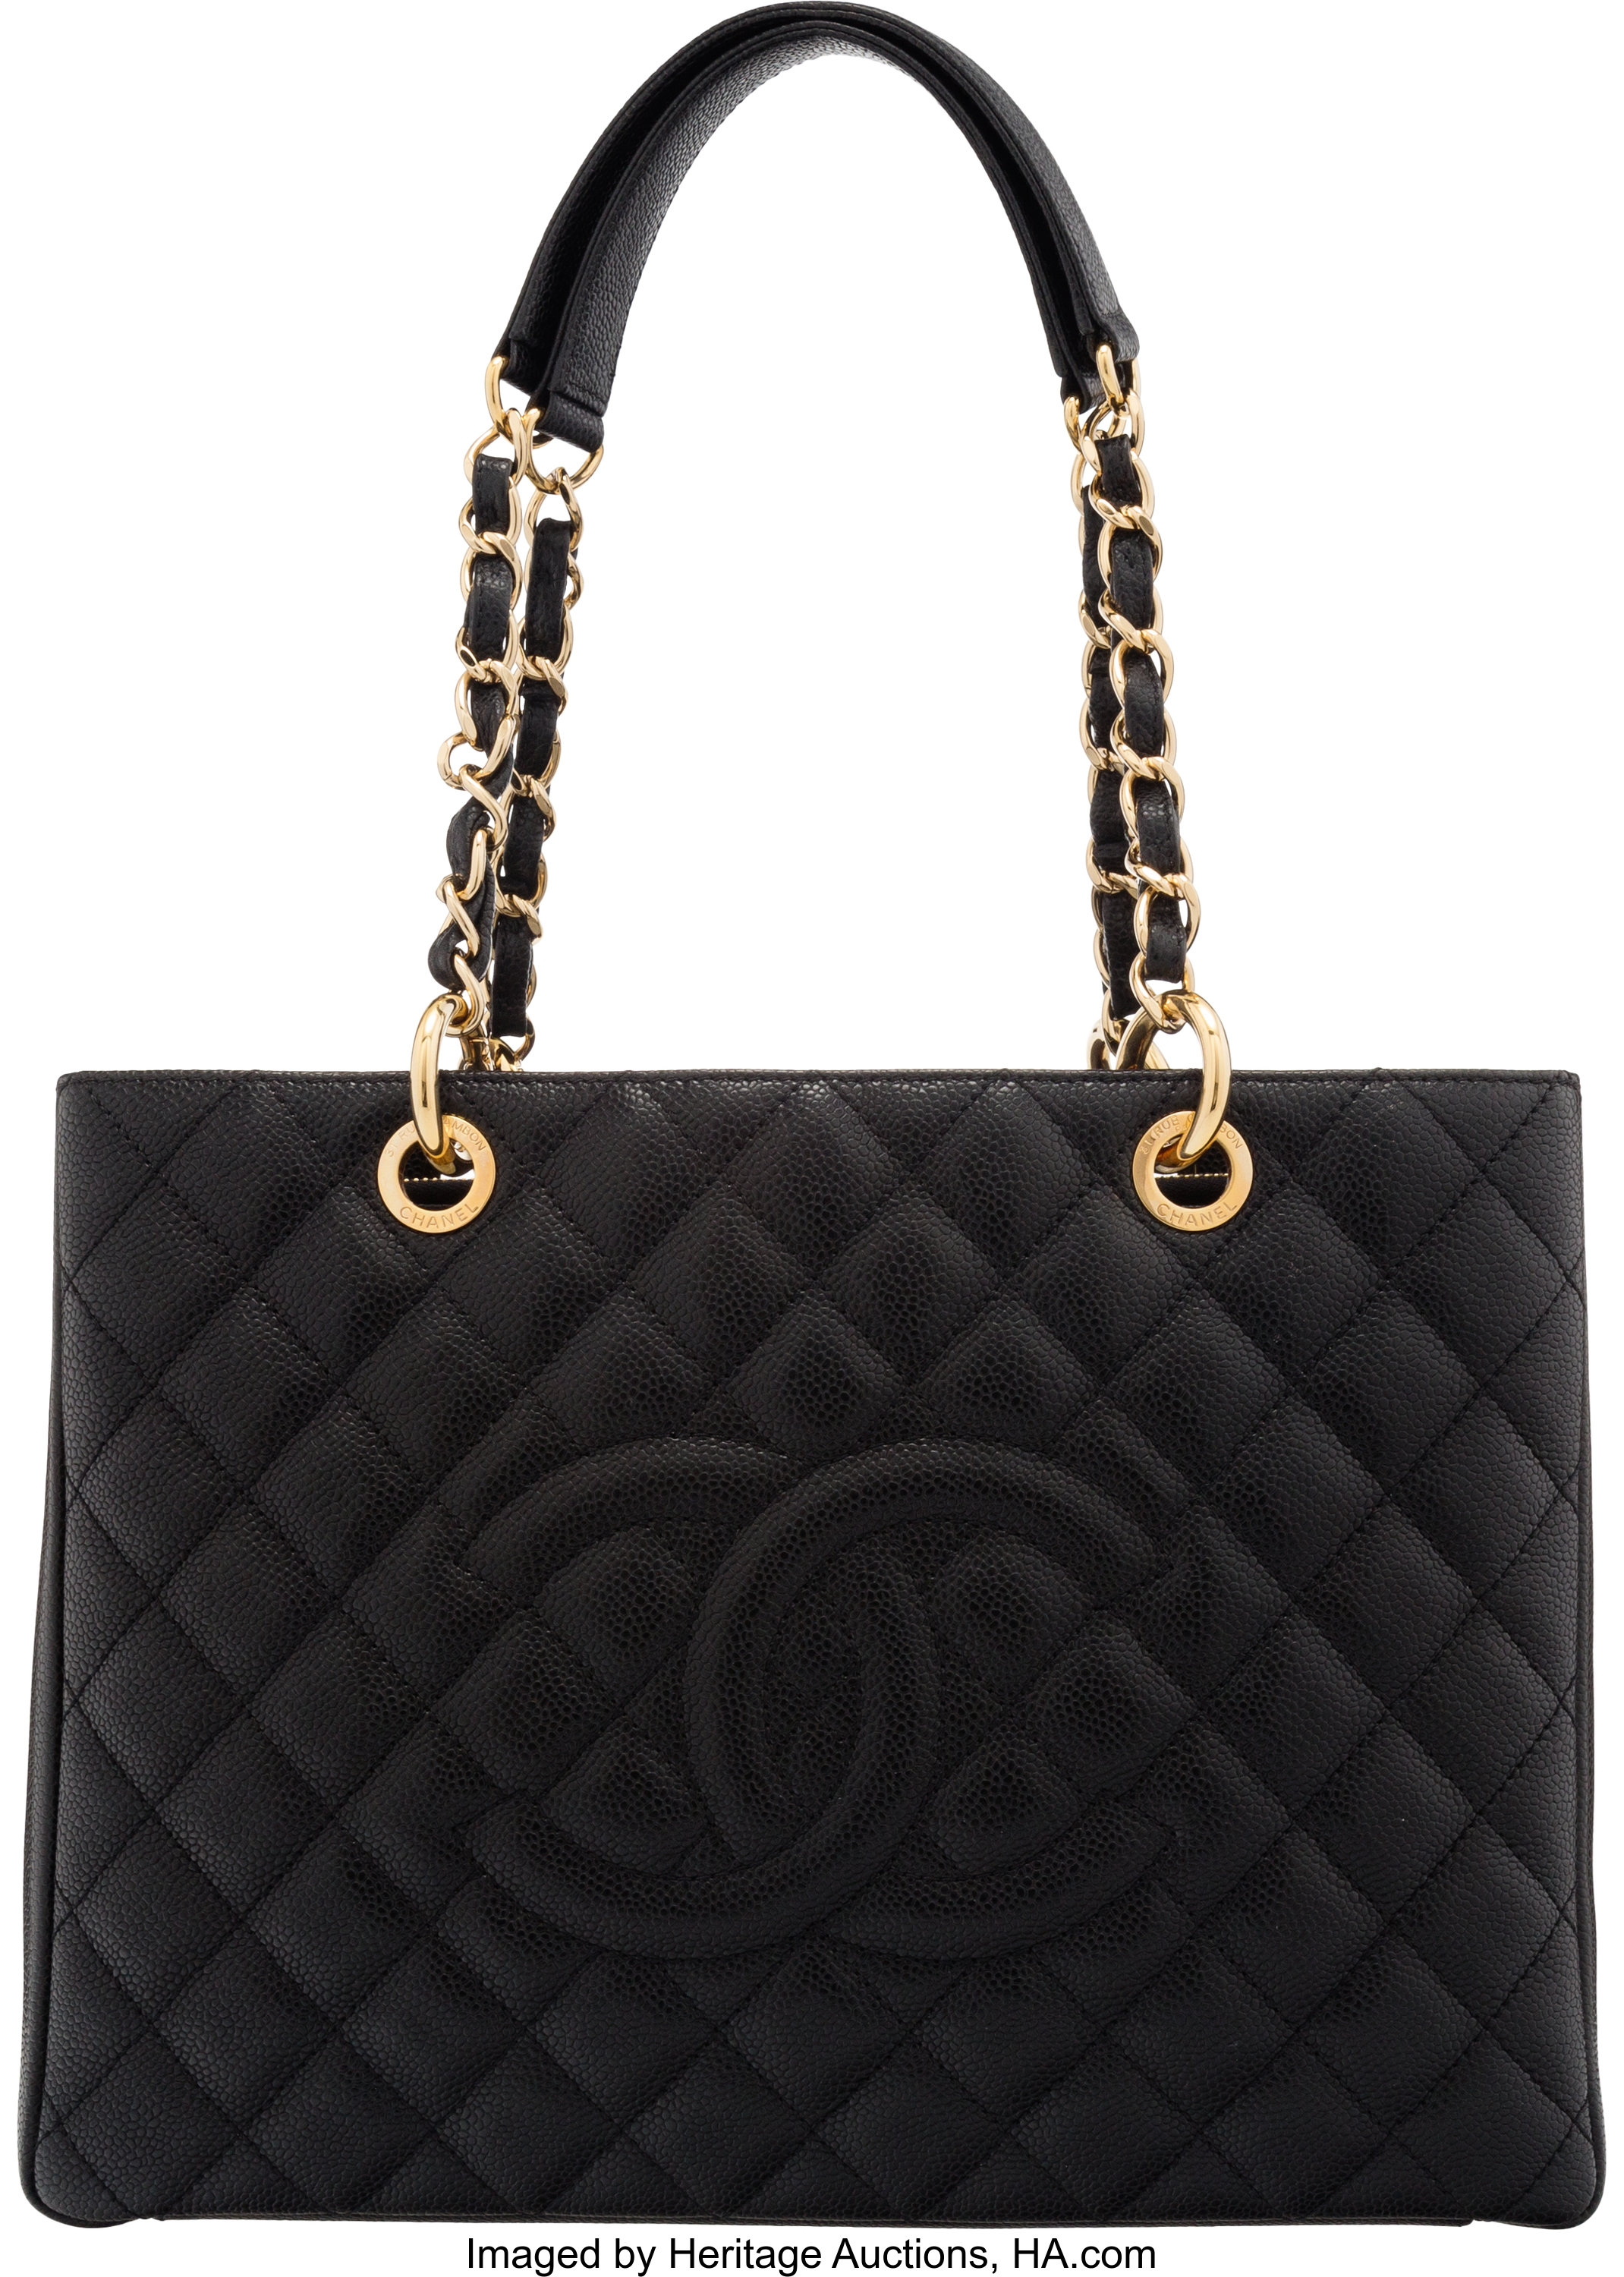 Chanel Black Quilted Caviar Leather Grand Shopping Tote Bag with